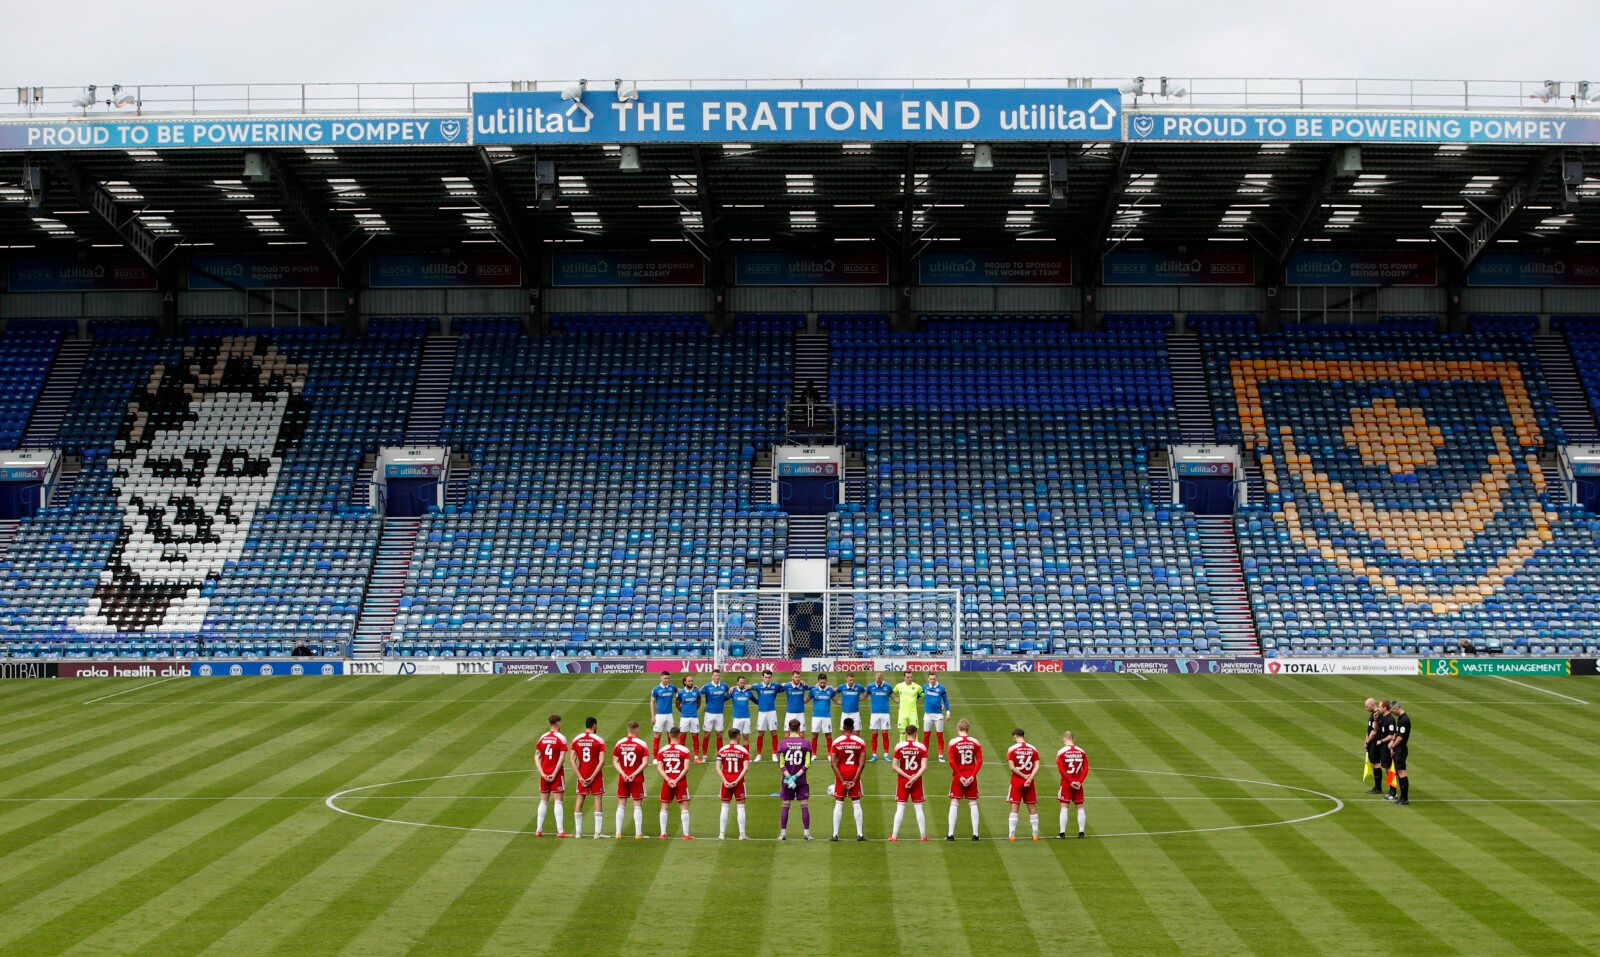 Soccer Football - League One - Portsmouth v Accrington Stanley - Fratton Park, Portsmouth, Britain - May 9, 2021 General view during a minute's silence in memory of former player Alan McLoughlin before kick off Action Images/Andrew Boyers EDITORIAL USE ONLY. No use with unauthorized audio, video, data, fixture lists, club/league logos or 'live' services. Online in-match use limited to 75 images, no video emulation. No use in betting, games or single club /league/player publications.  Please cont